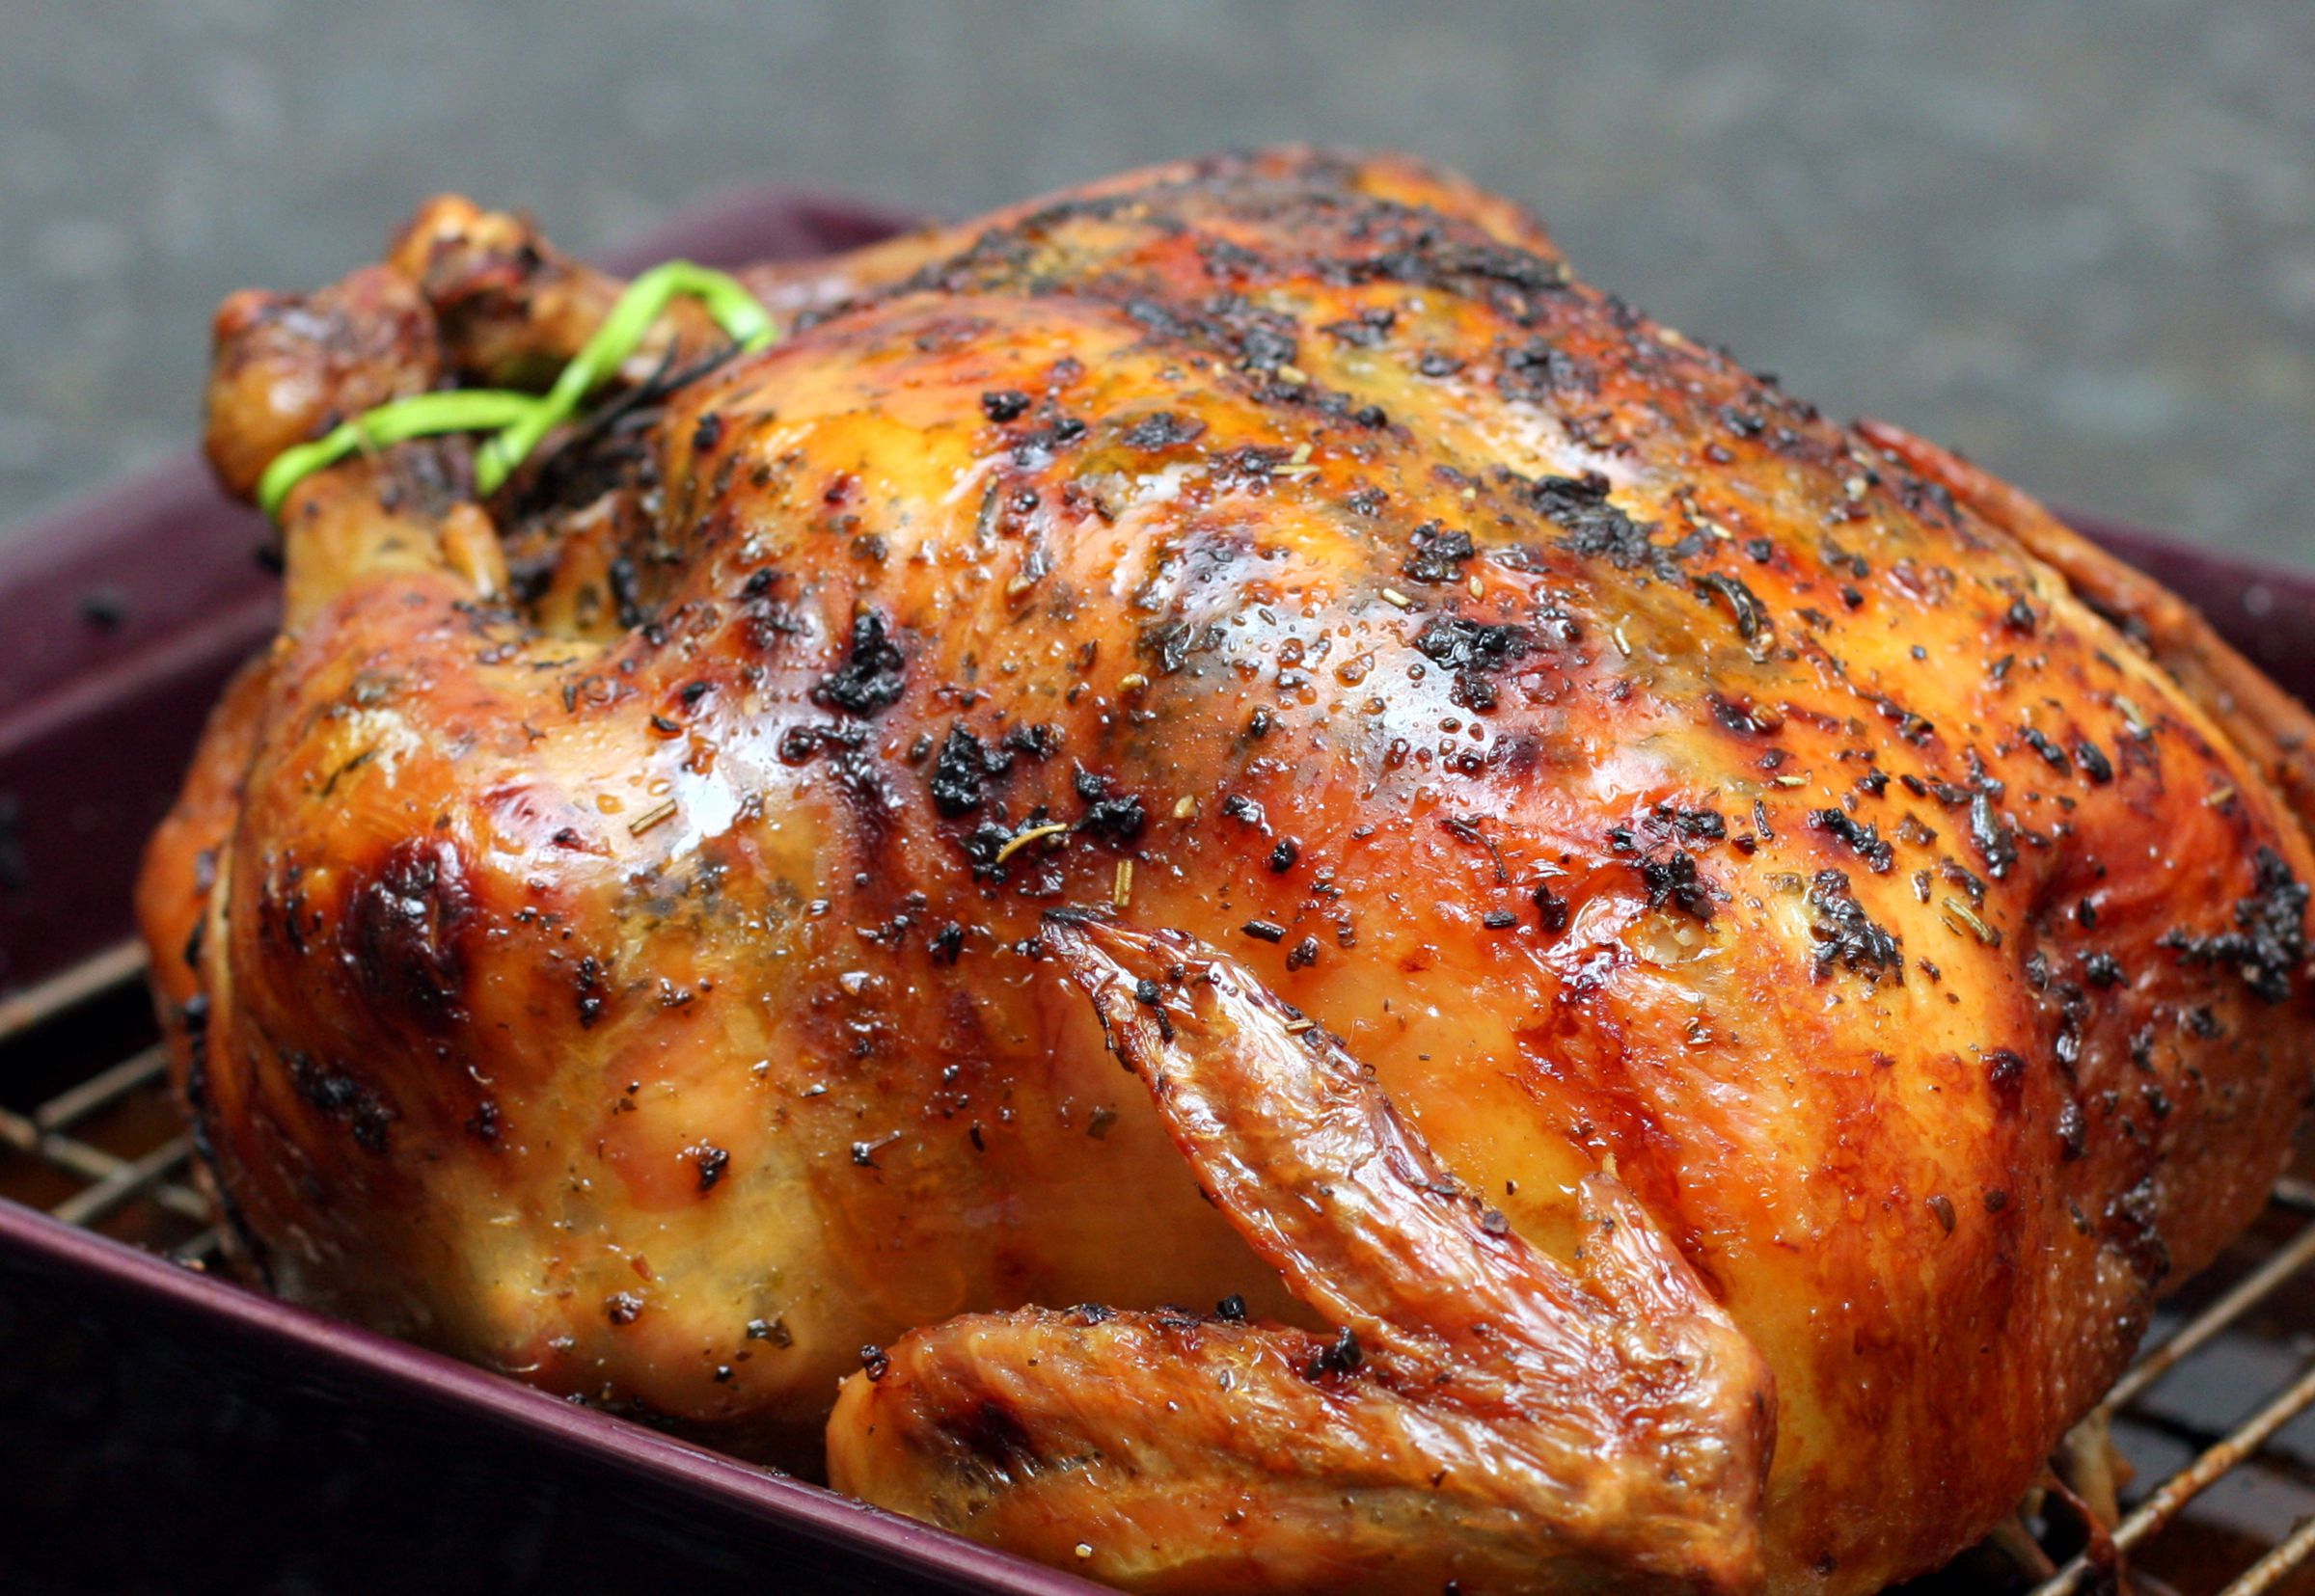 Lemon and Herb Roasted Chicken Recipe